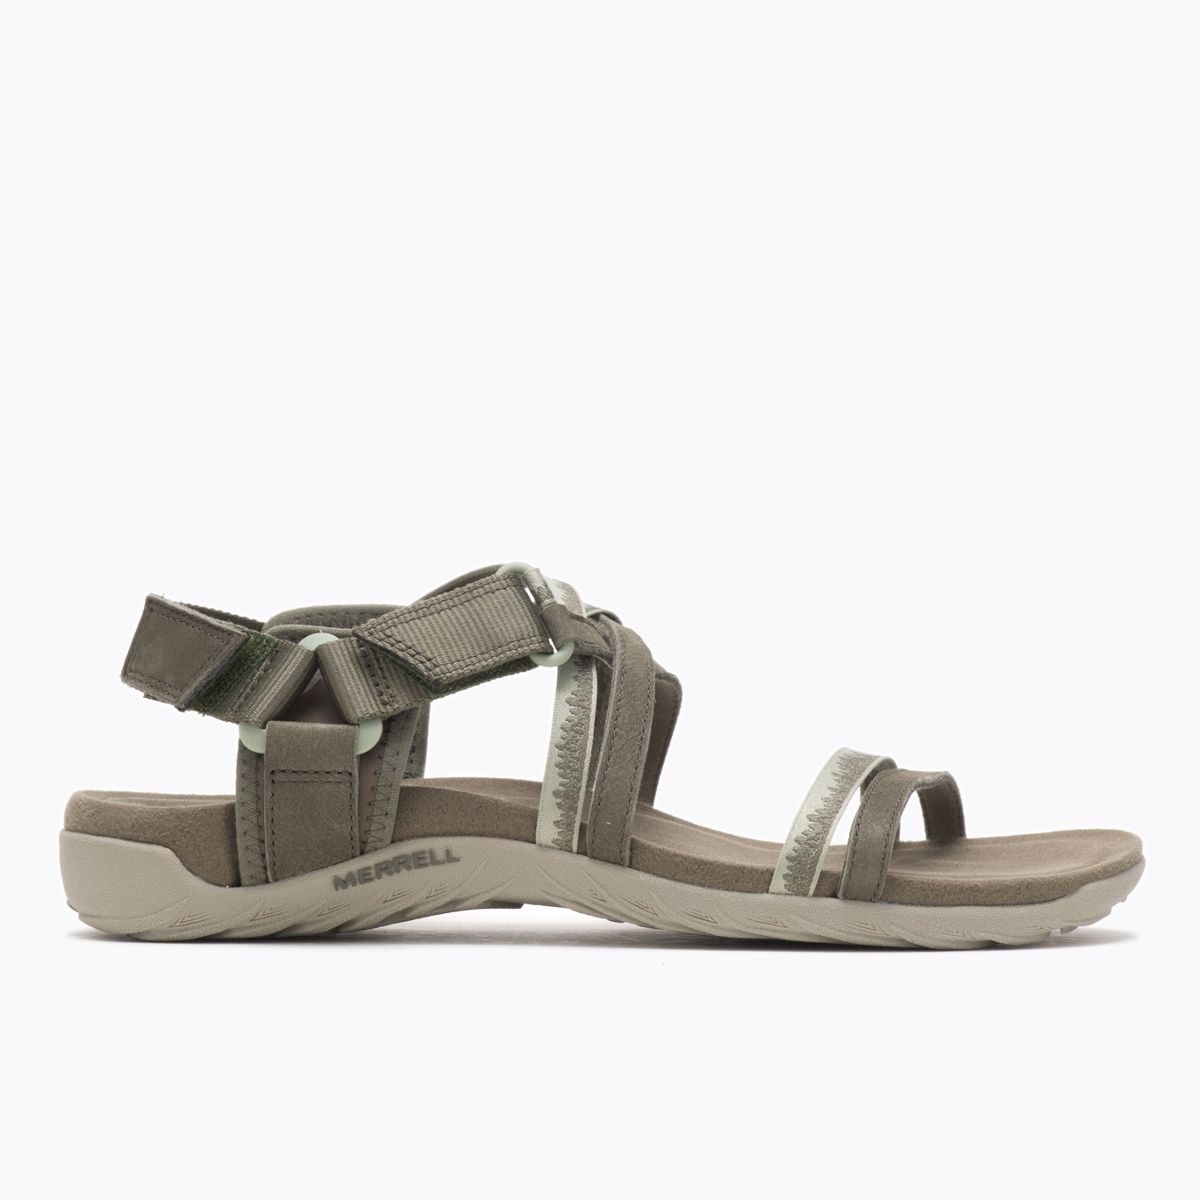 Comfortable Hiking Sandals |